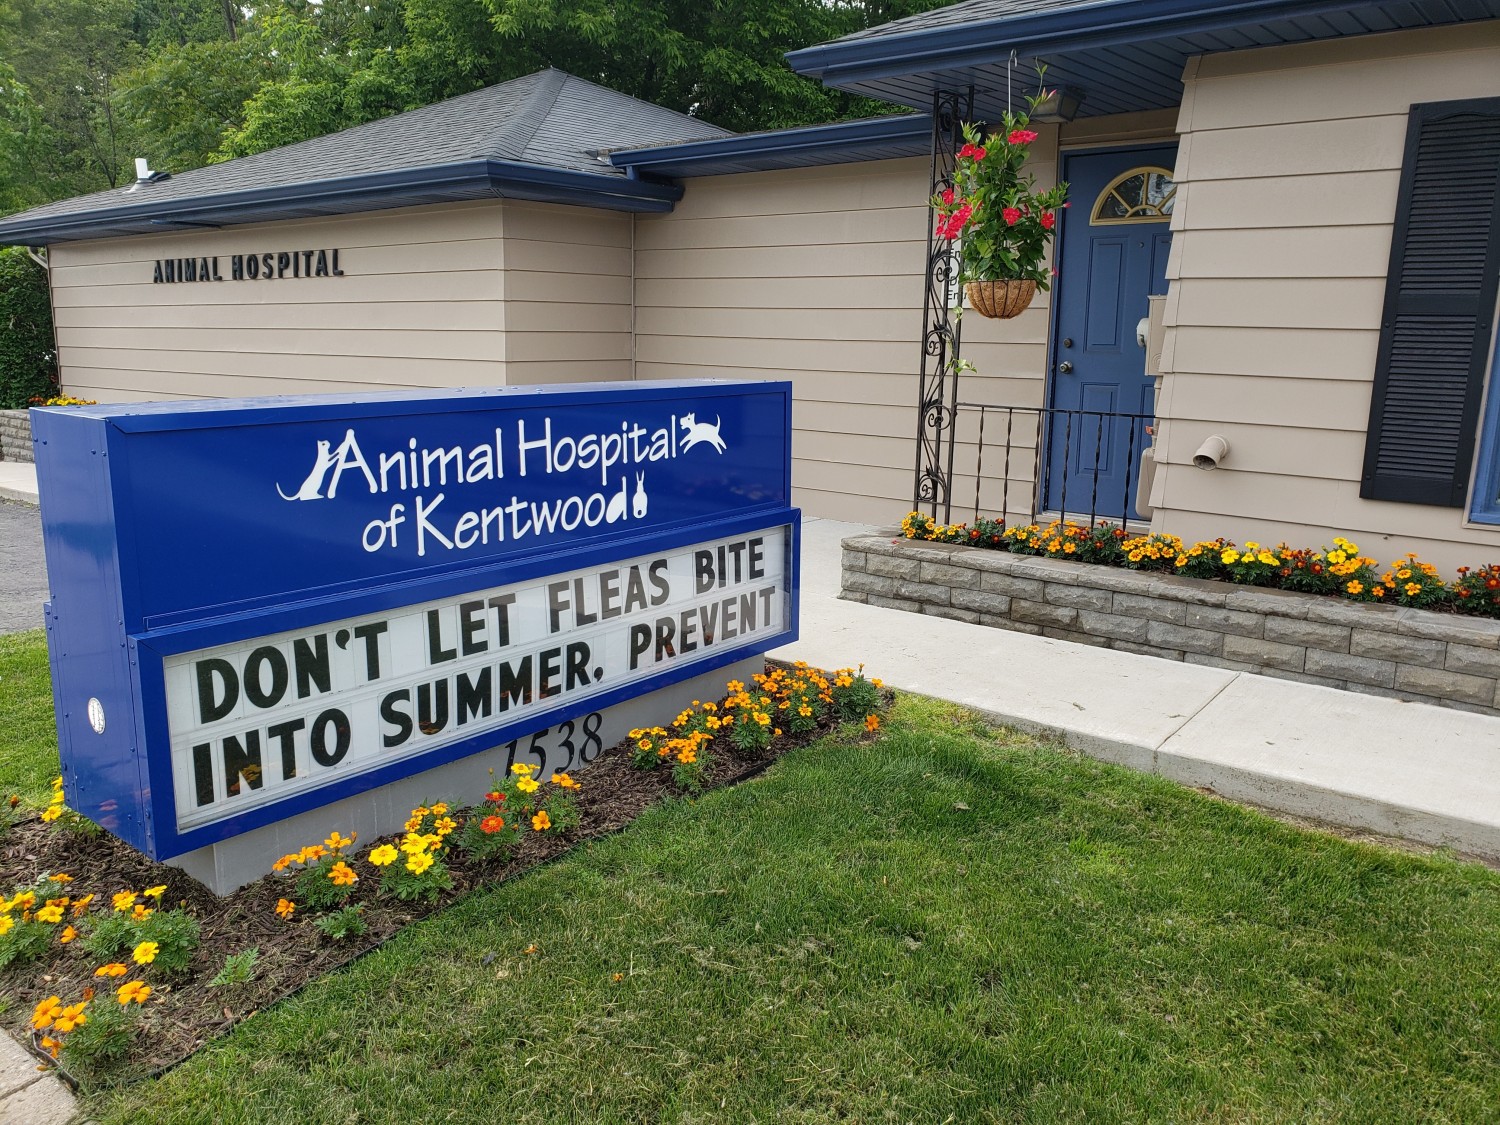 The Animal Hospital of Kentwood Building